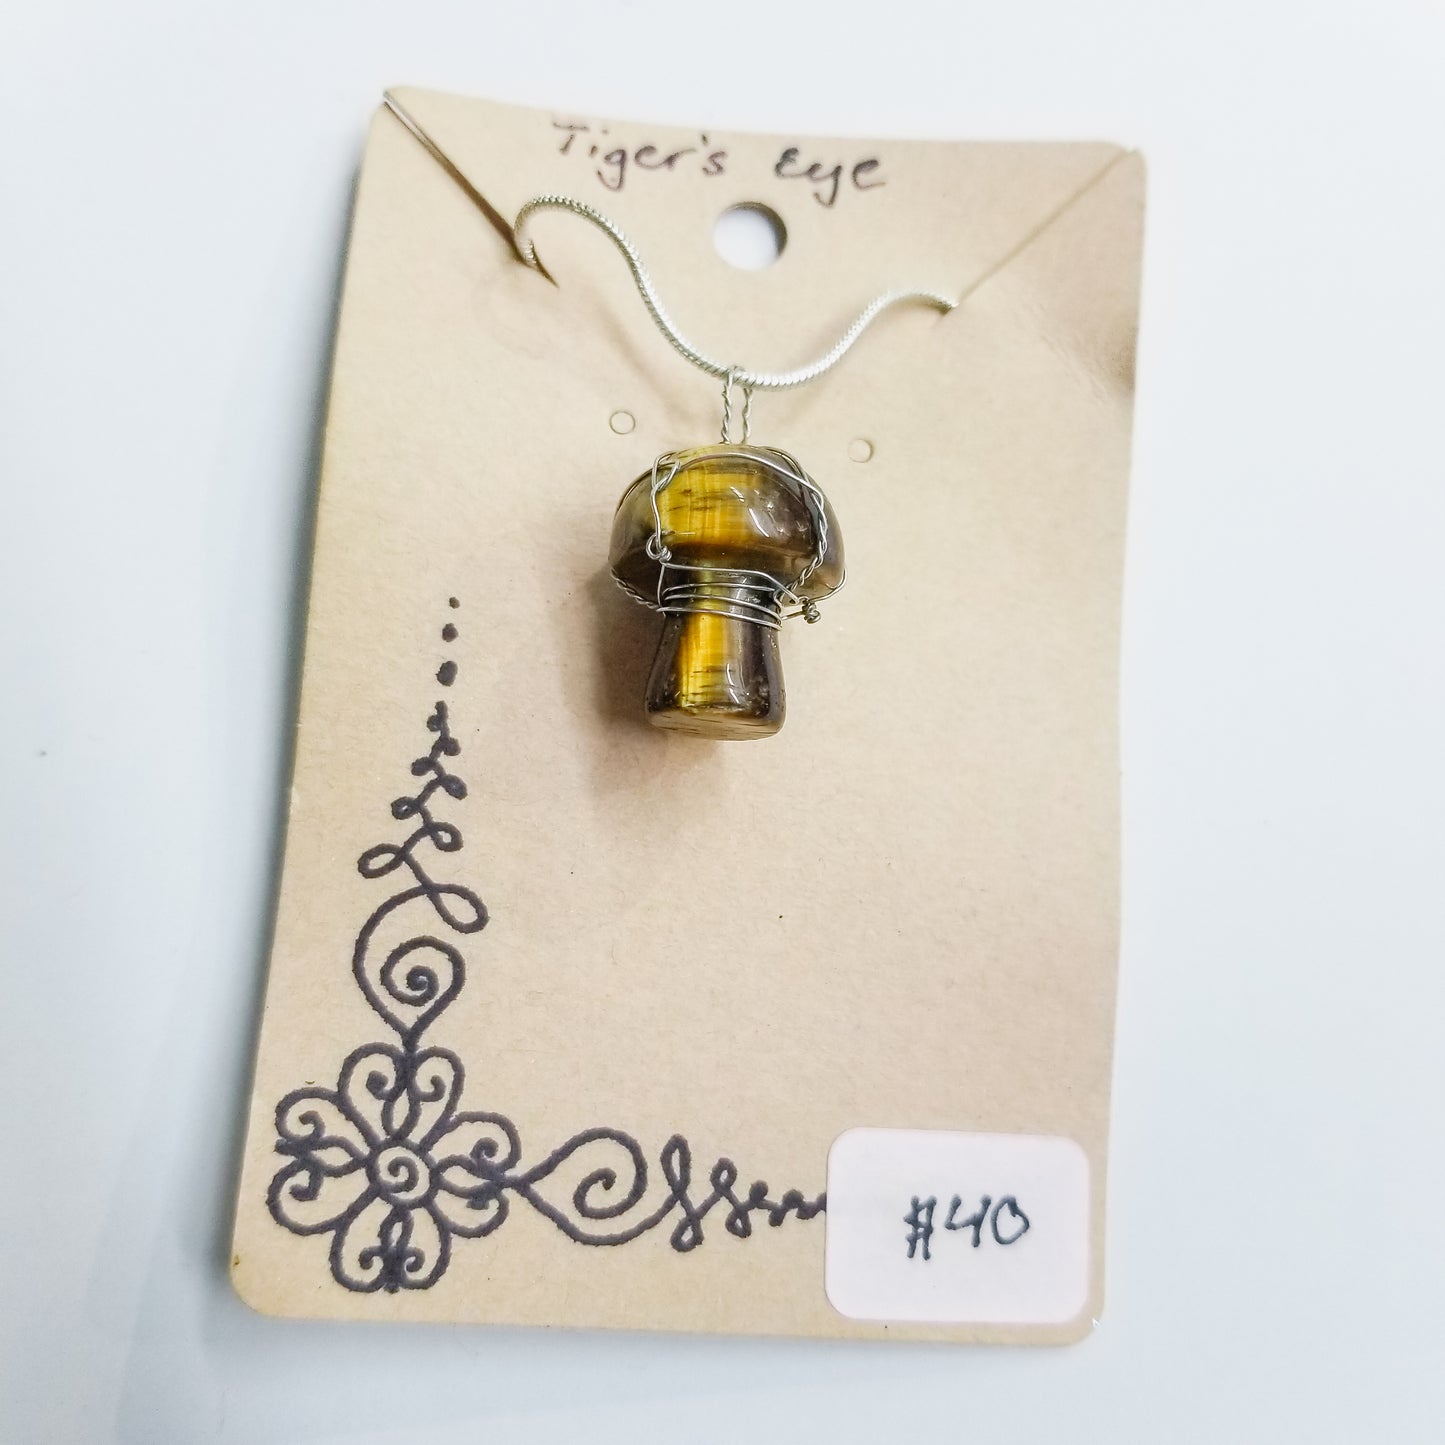 Tiger's Eye Mushi Handwrapped Necklace